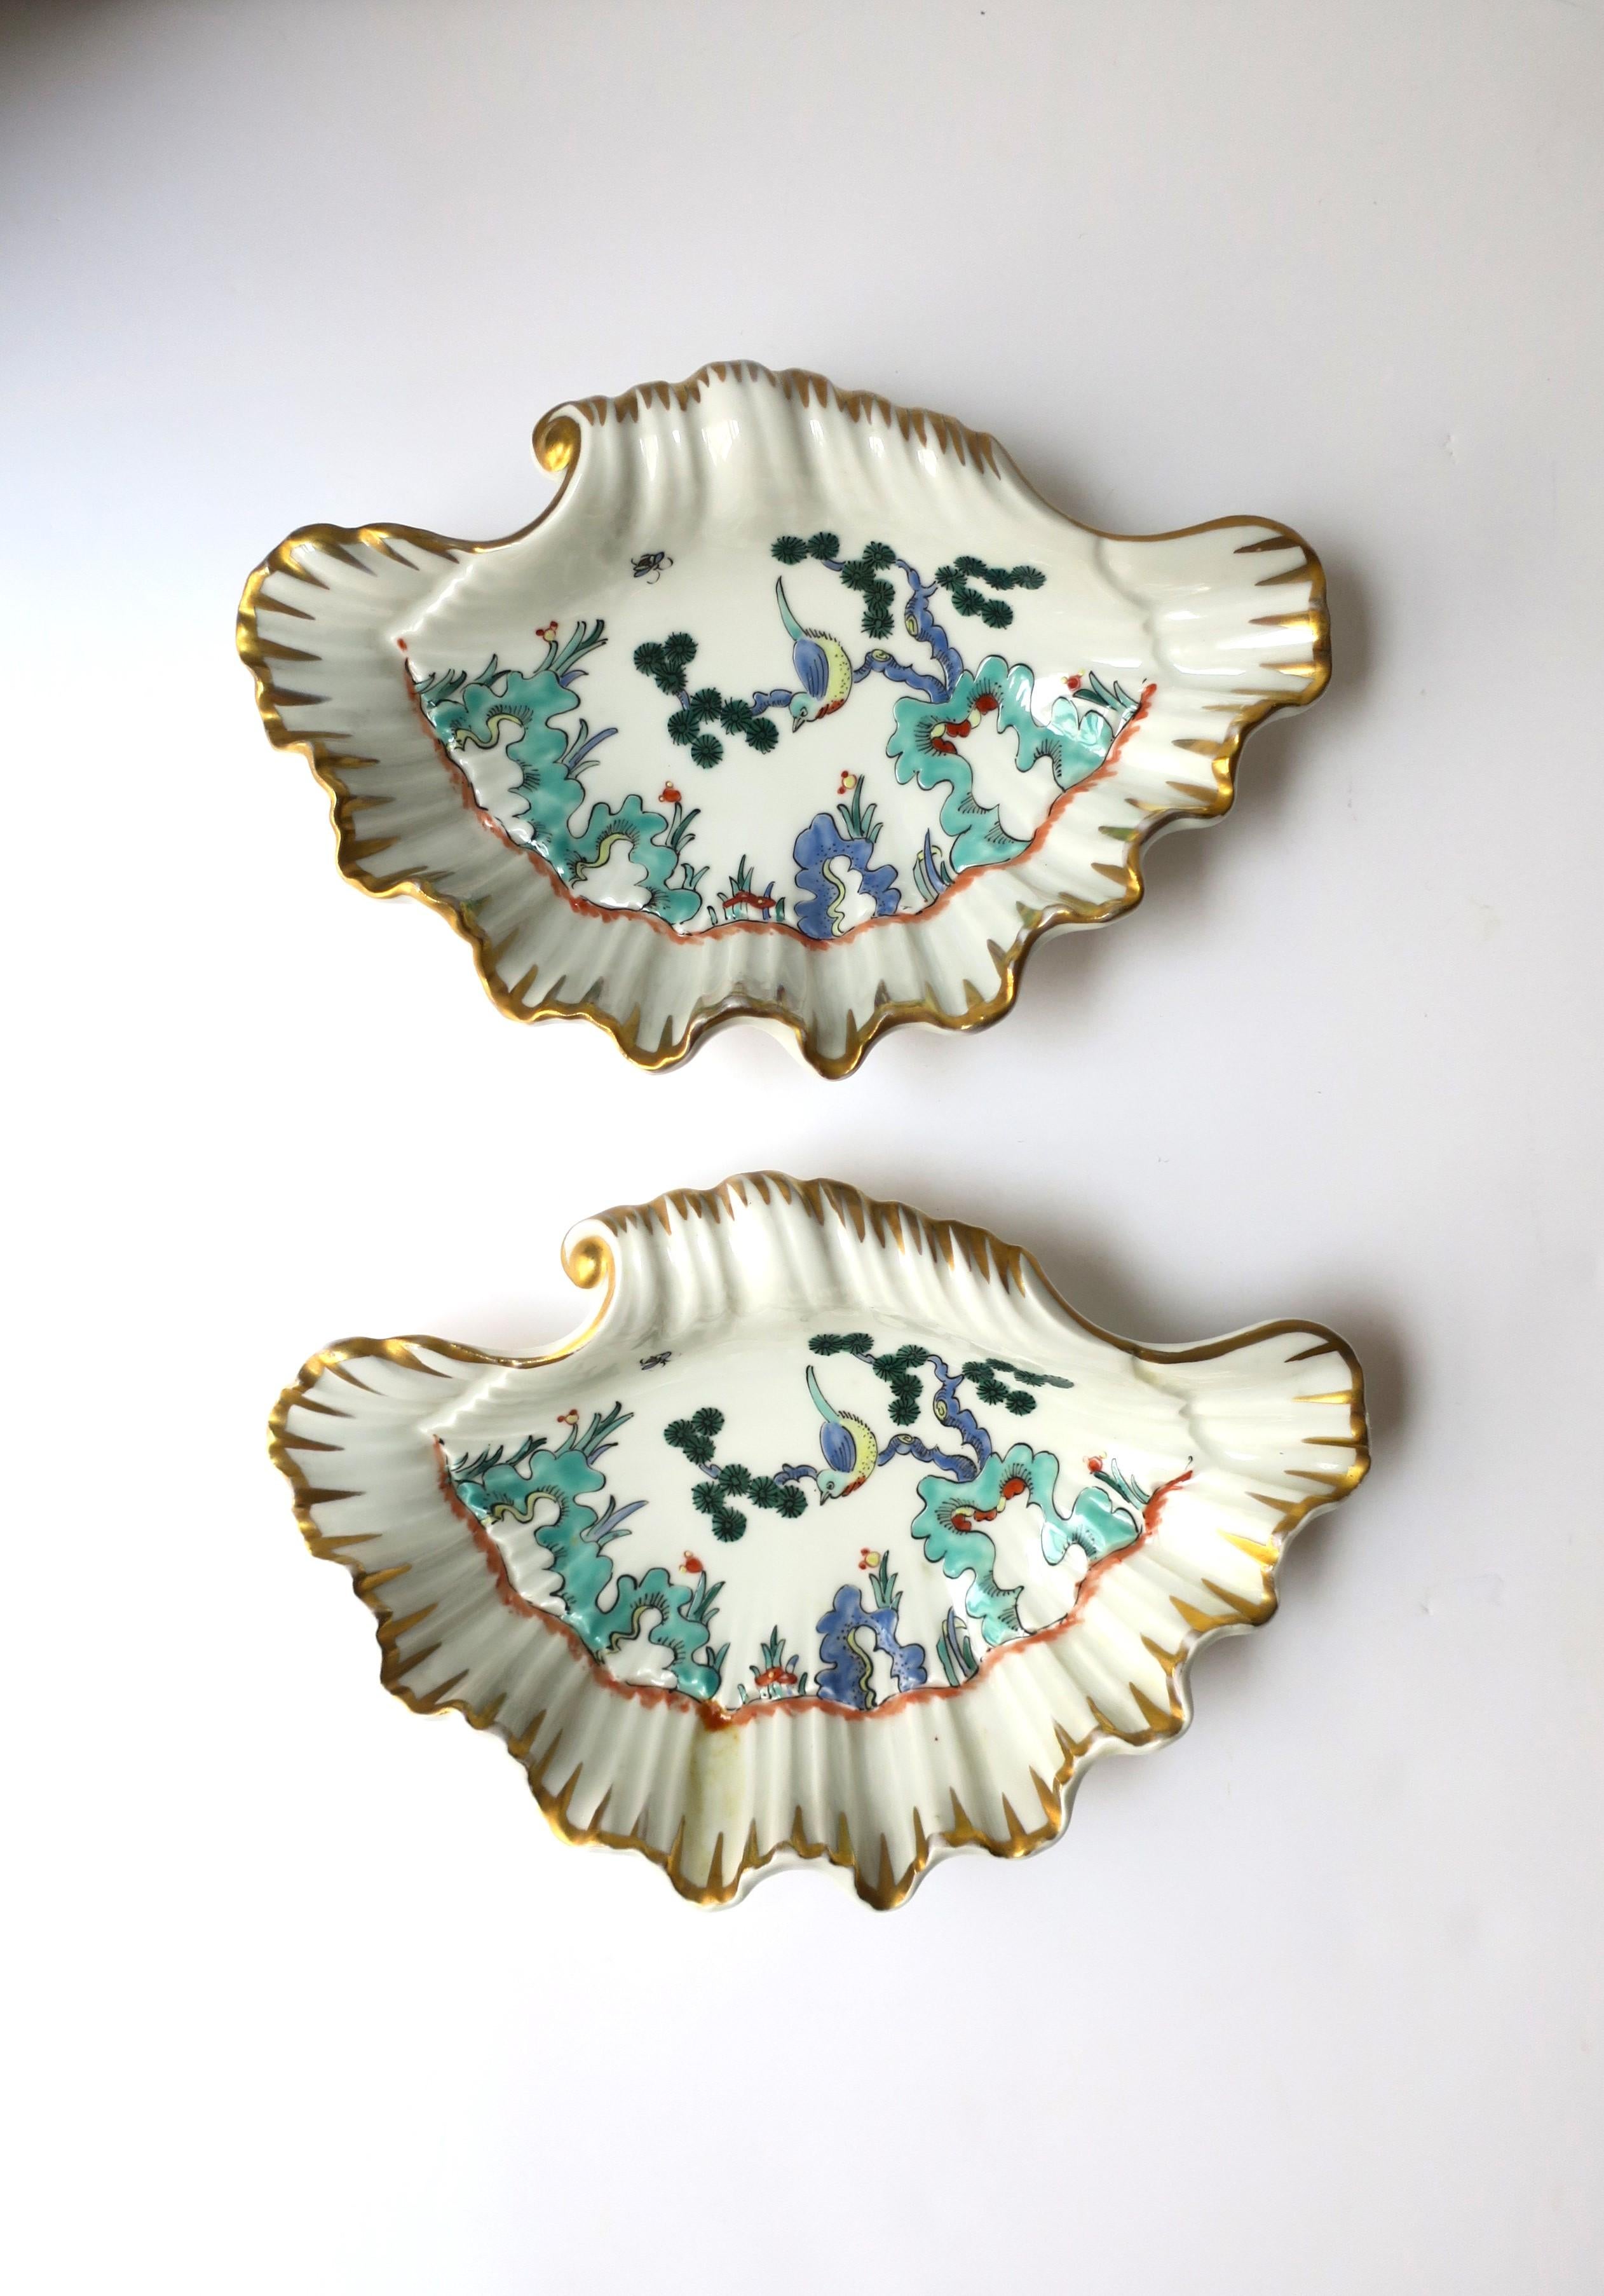 20th Century French Porcelain Seashell Bowls with Bird Design, Pair For Sale